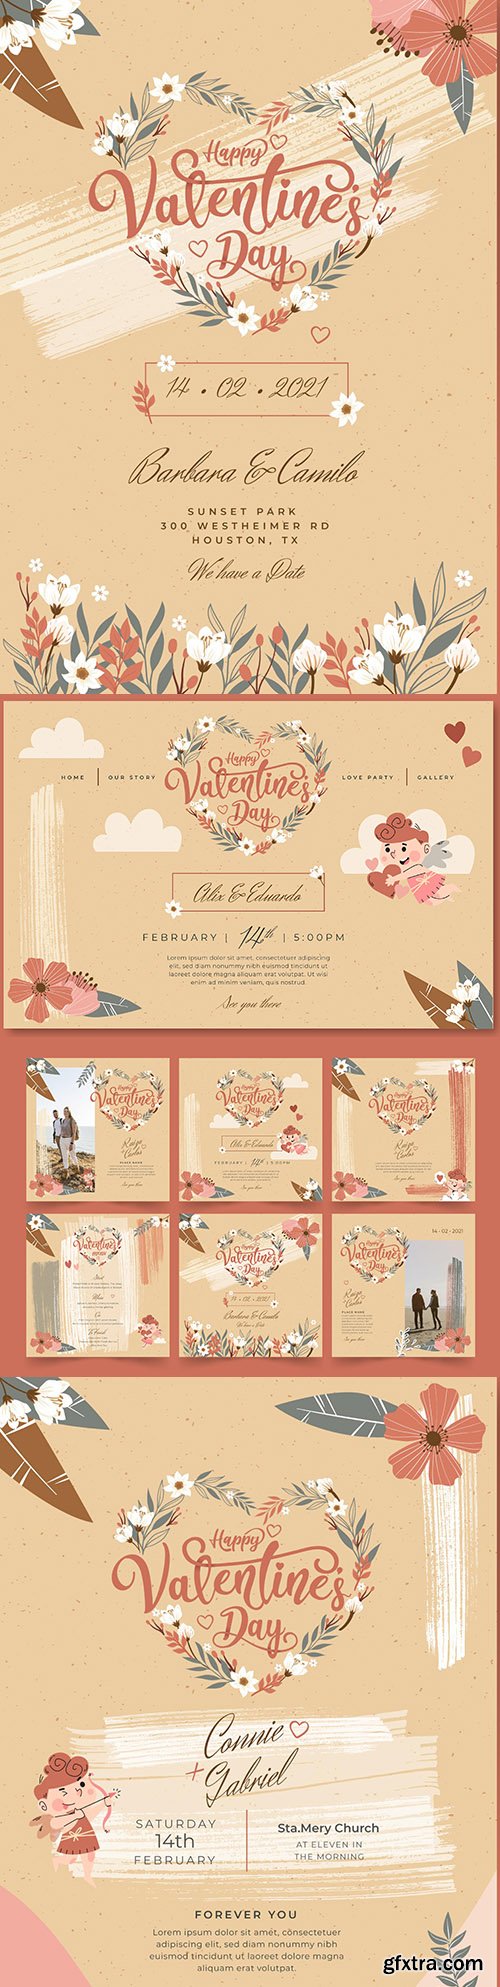 Valentine\'s Day postcard and instagram messages